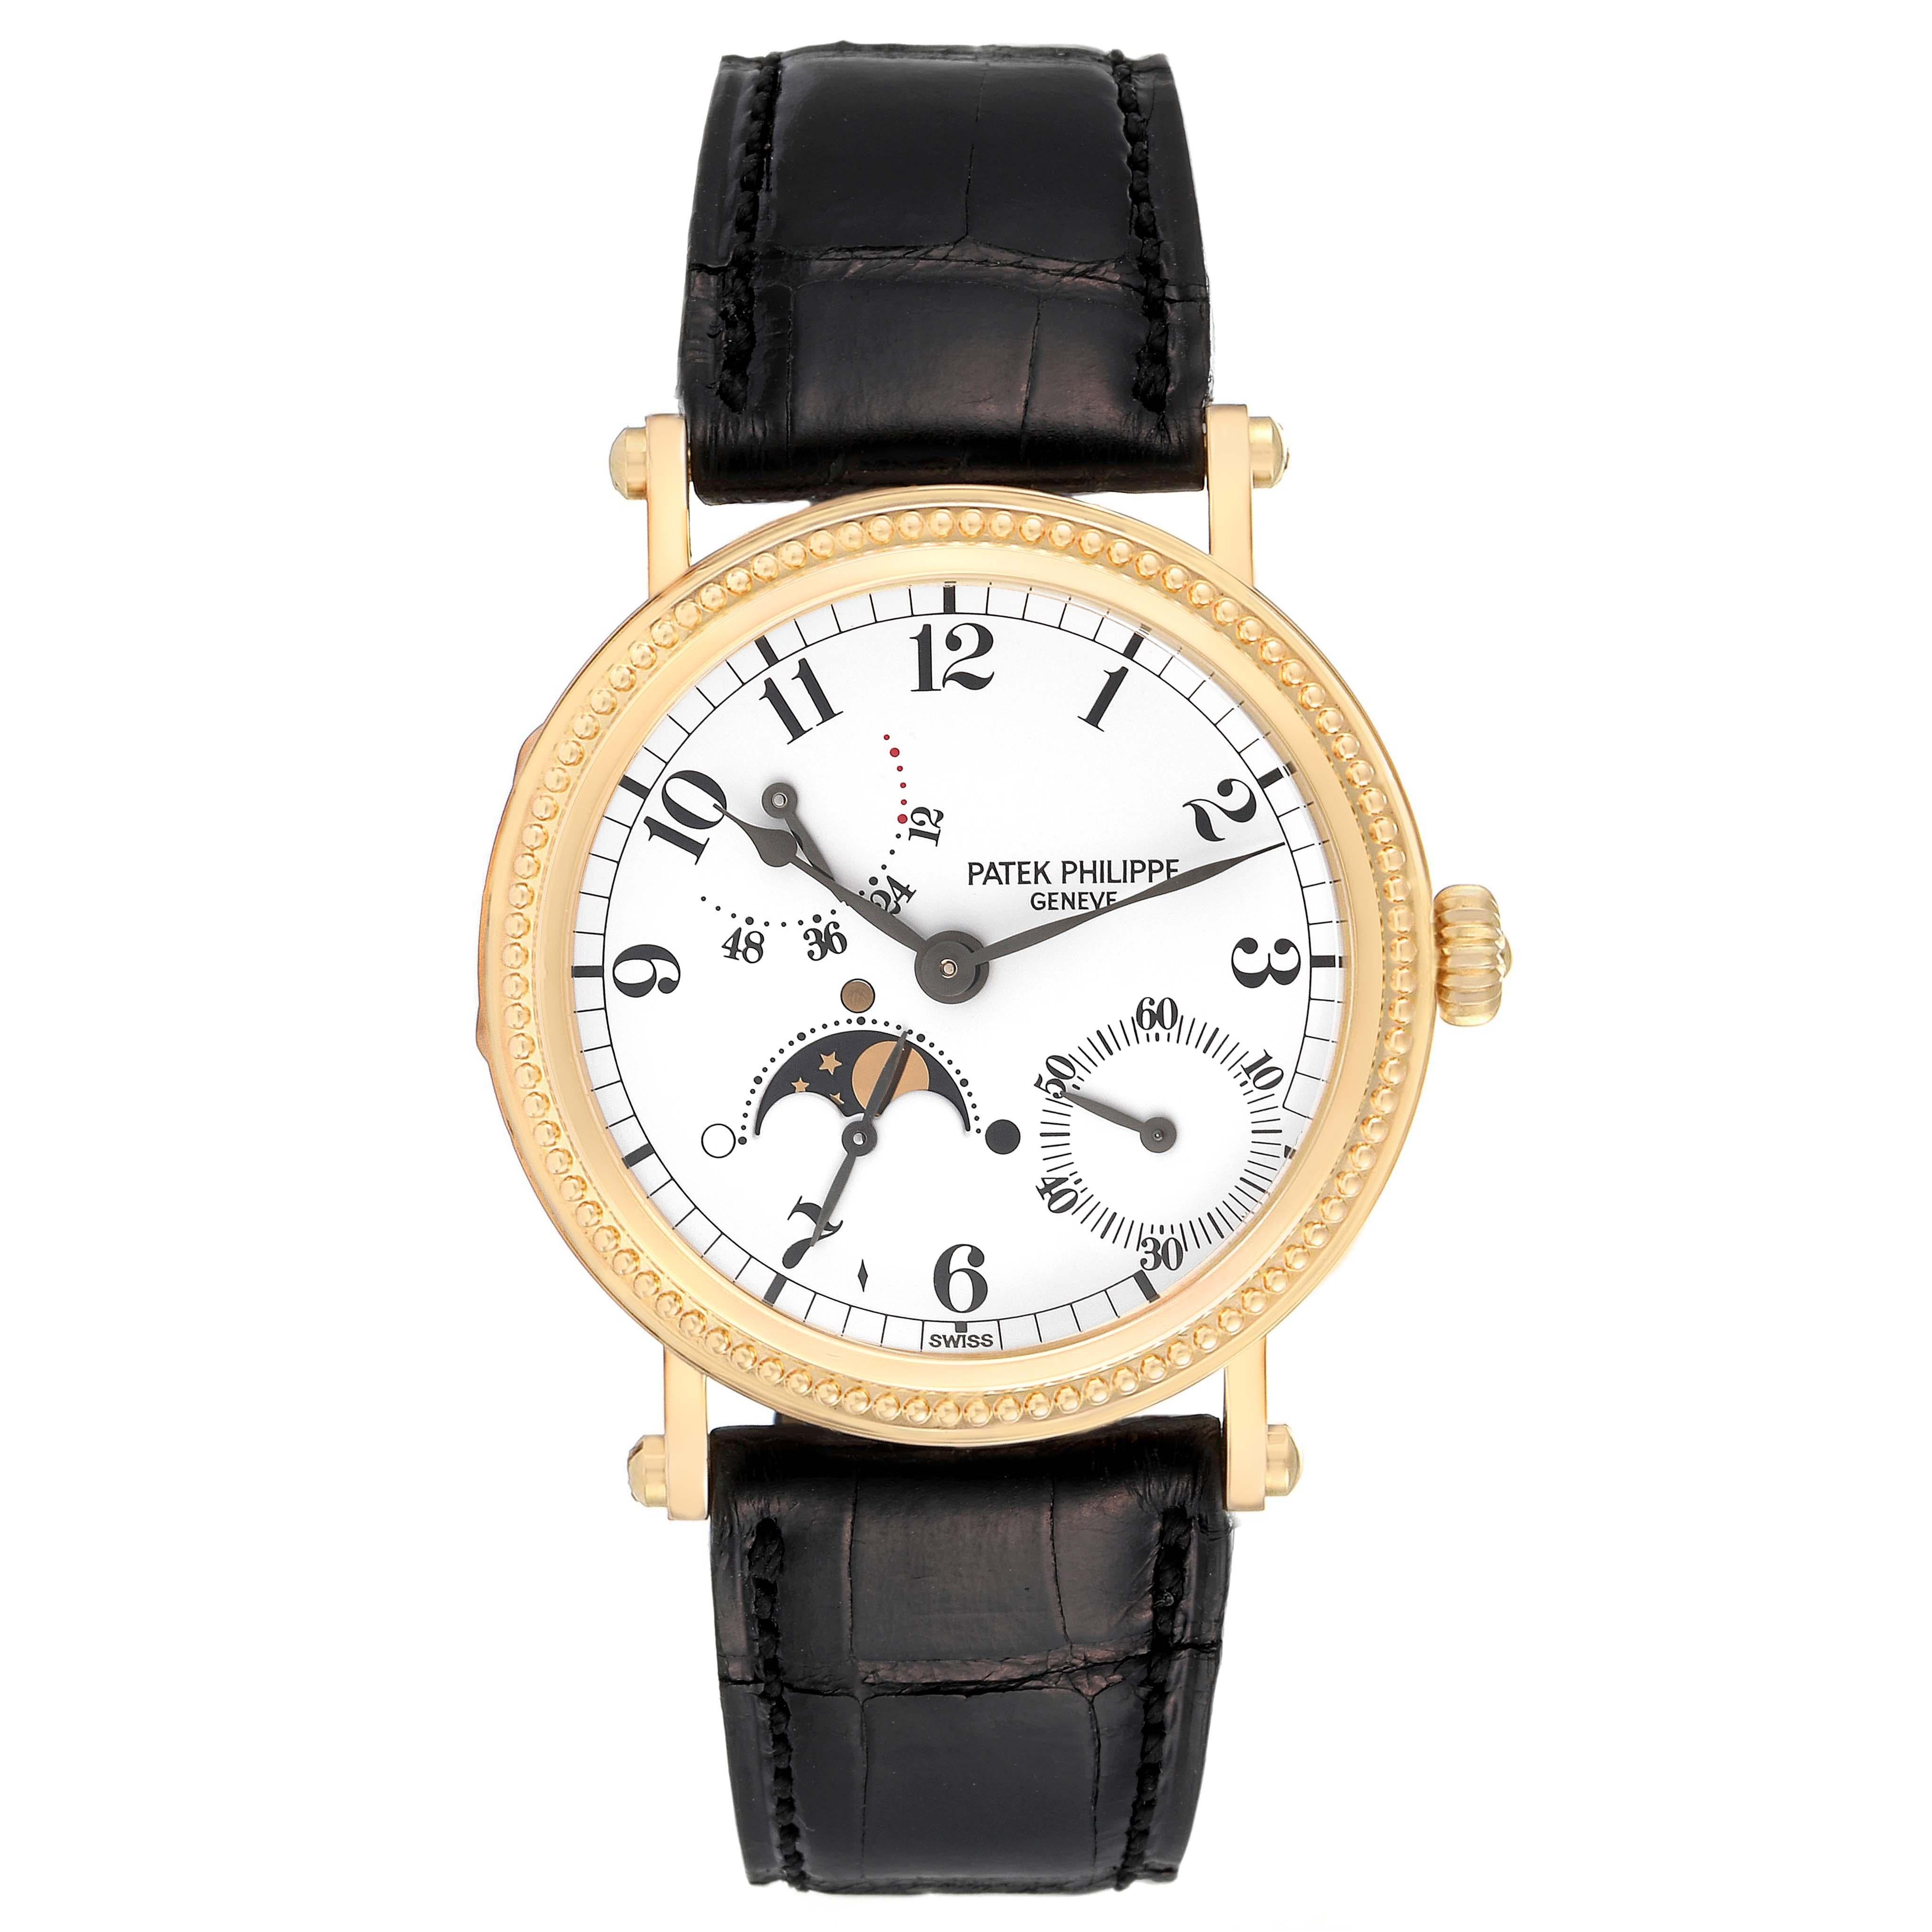 Patek Philippe Calatrava Yellow Gold Moon Phase Mens Watch 5015. Automatic self-winding movement. 18k yellow gold case 35.5 mm in diameter. Hinged case back over transparent sapphire crystal to view the movement, screwed bar lugs. 18k yellow gold